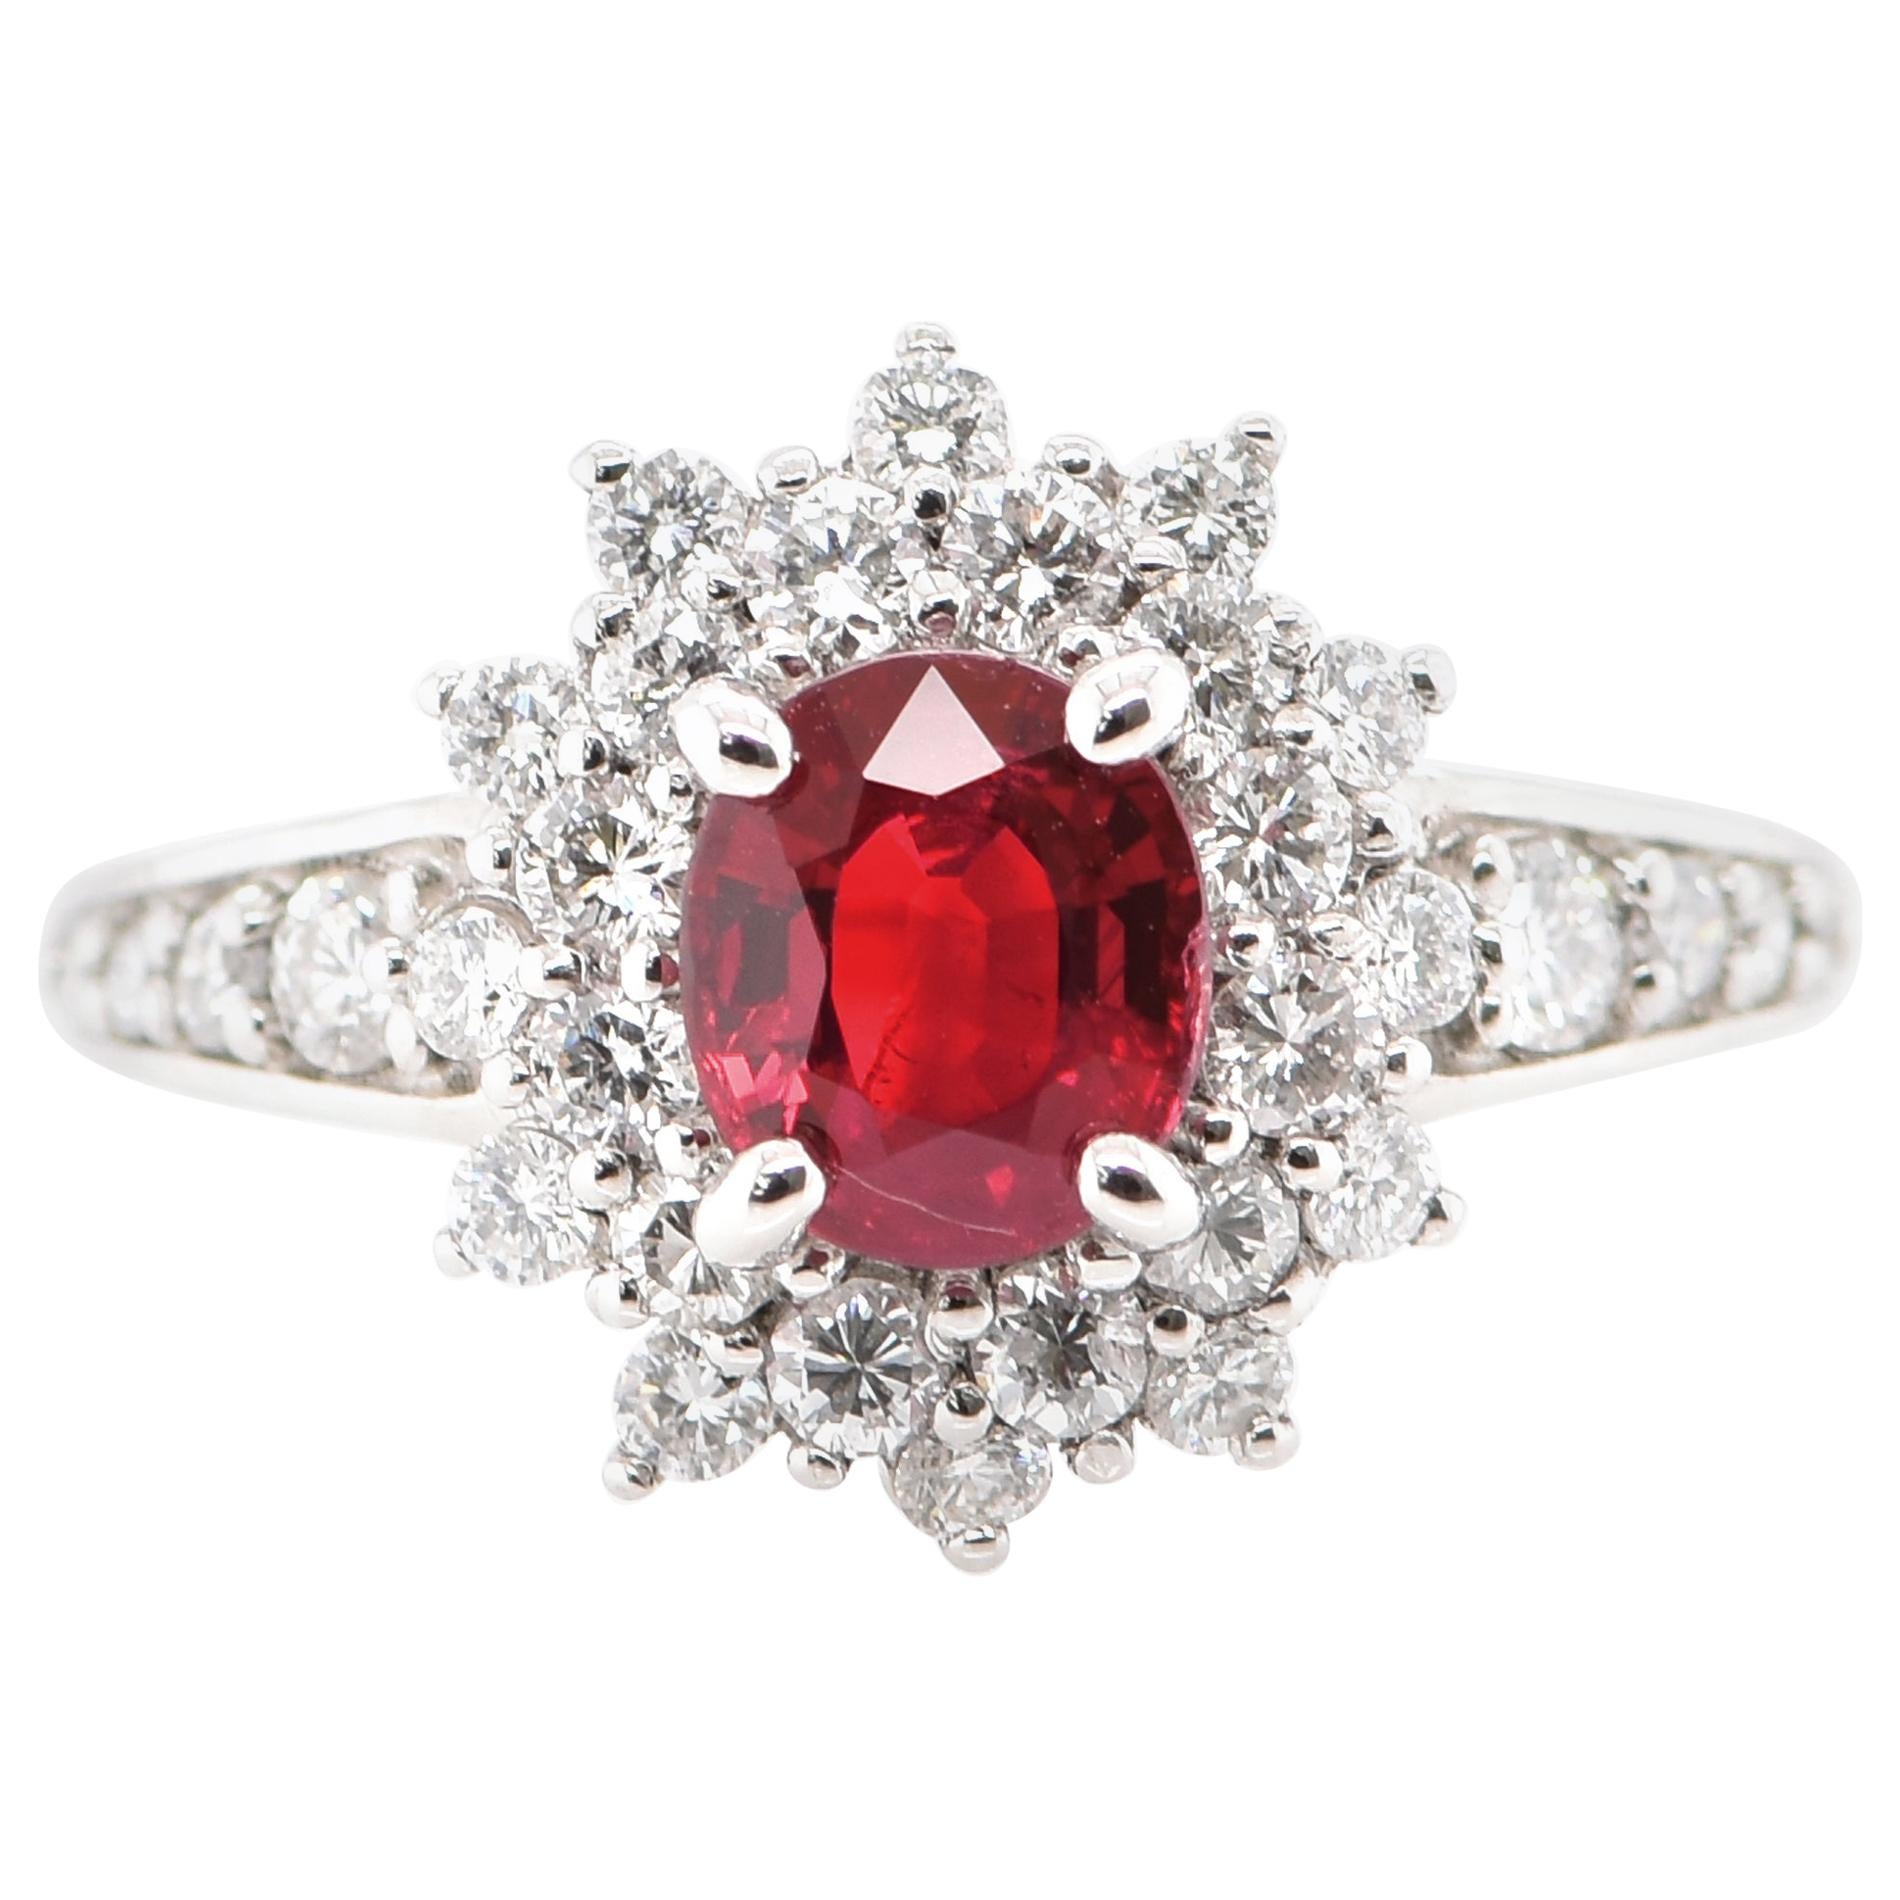 1.137 Carat Ruby and Diamond Double Halo Ring Set in Platinum